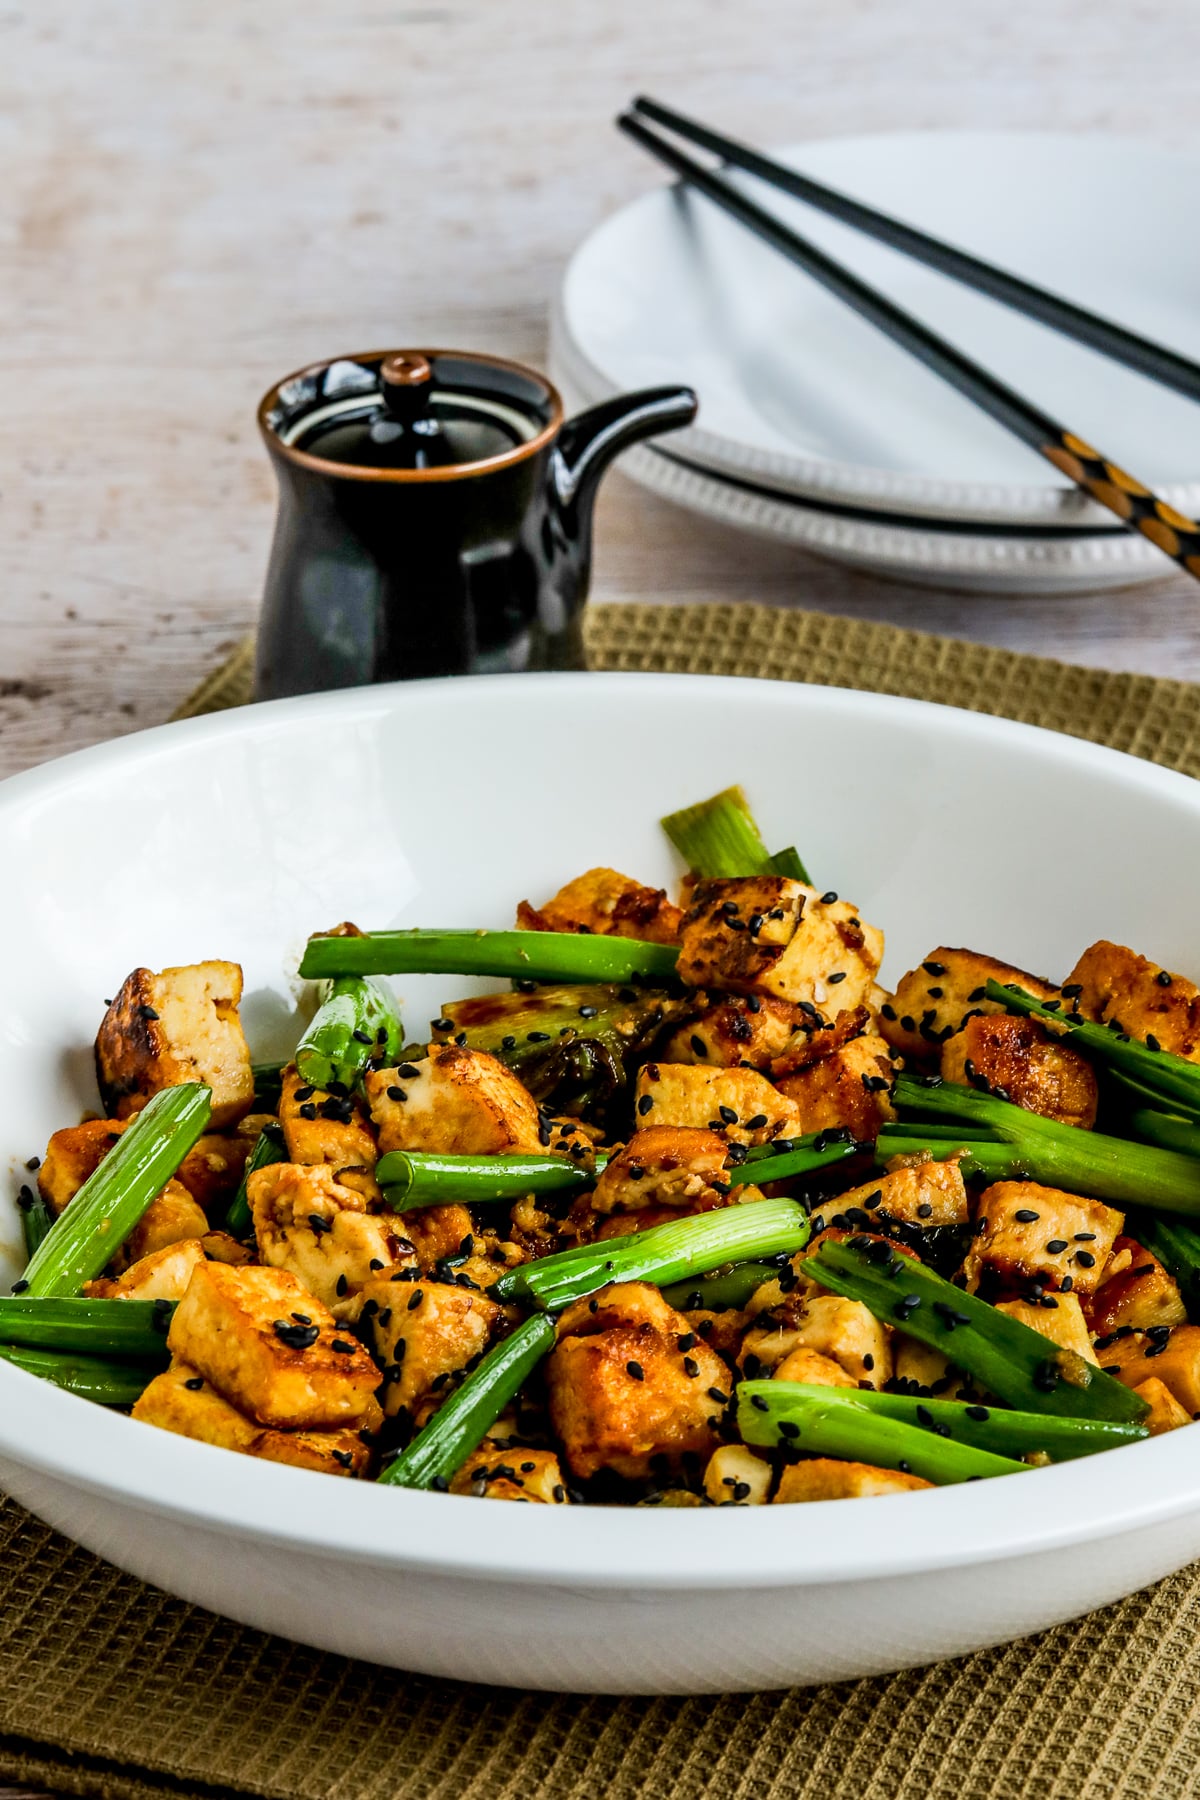 Stir-Fried Tofu with Ginger and Soy Sauce in serving dish with soy sauce and chopsticks on plate.